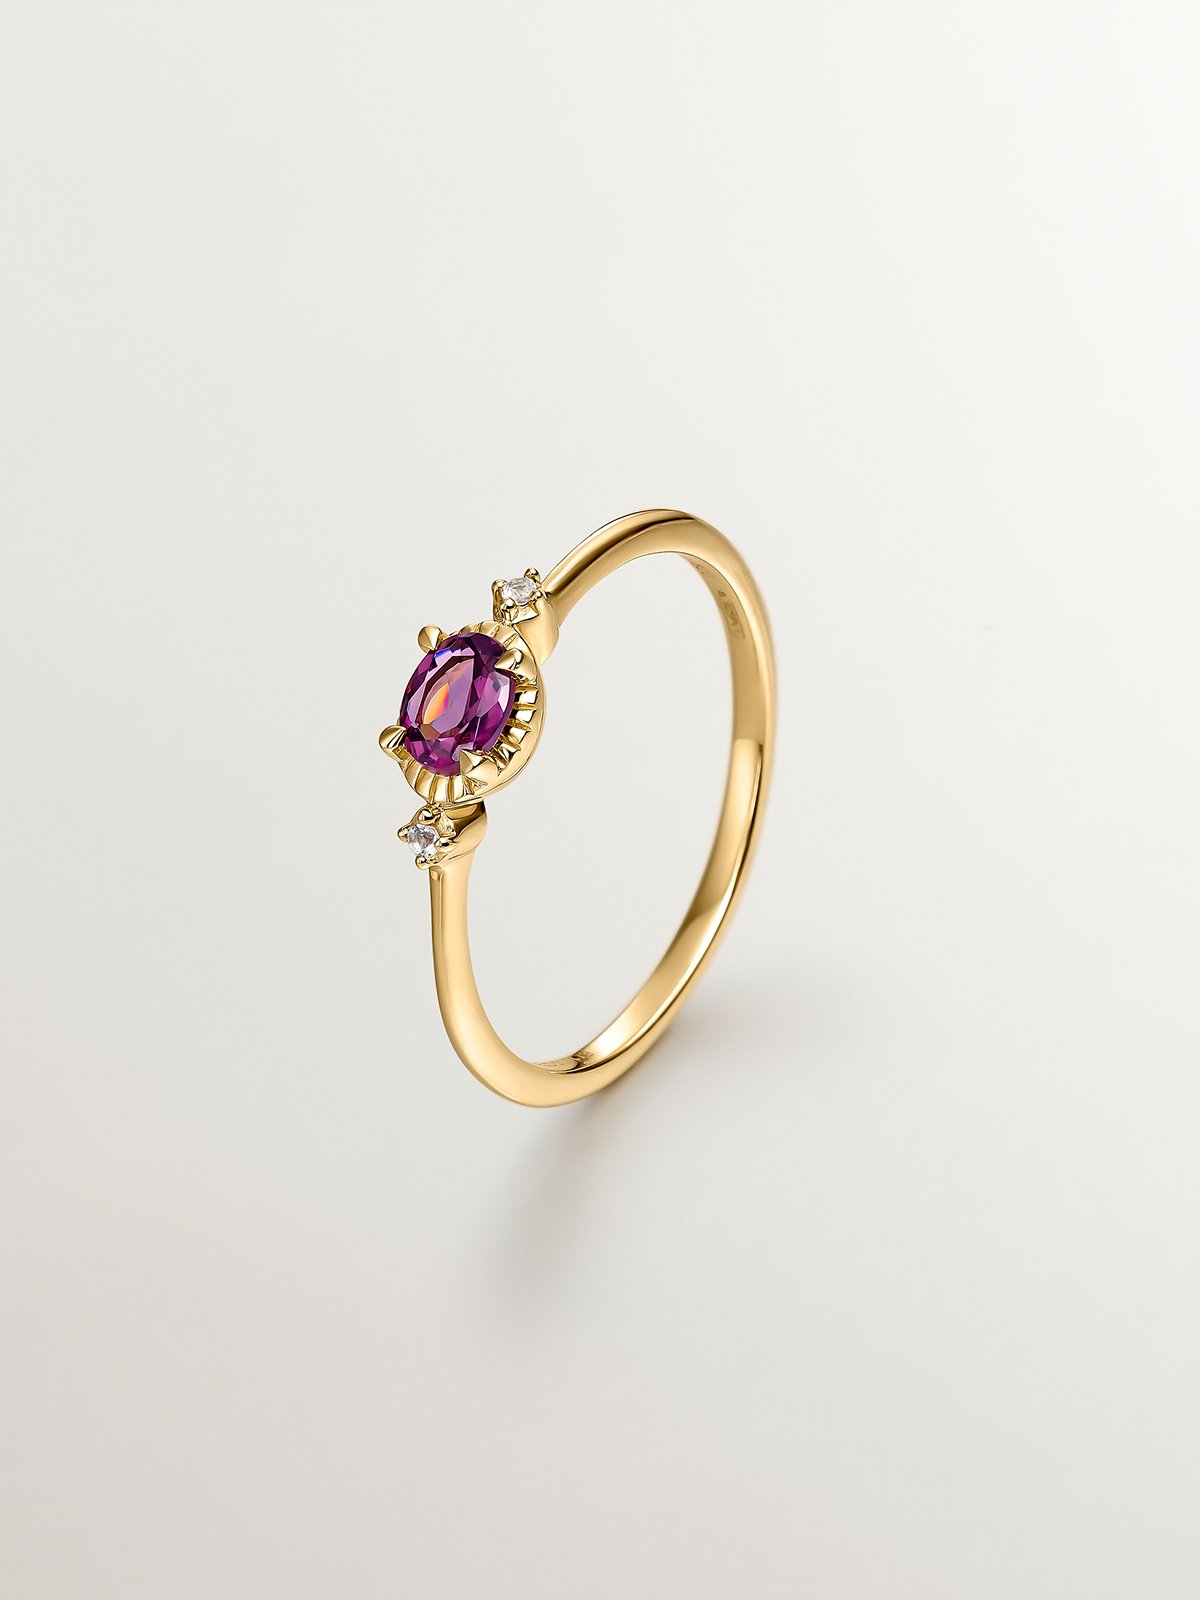 18K yellow gold plated 925 silver ring with rhodolite and topaz.